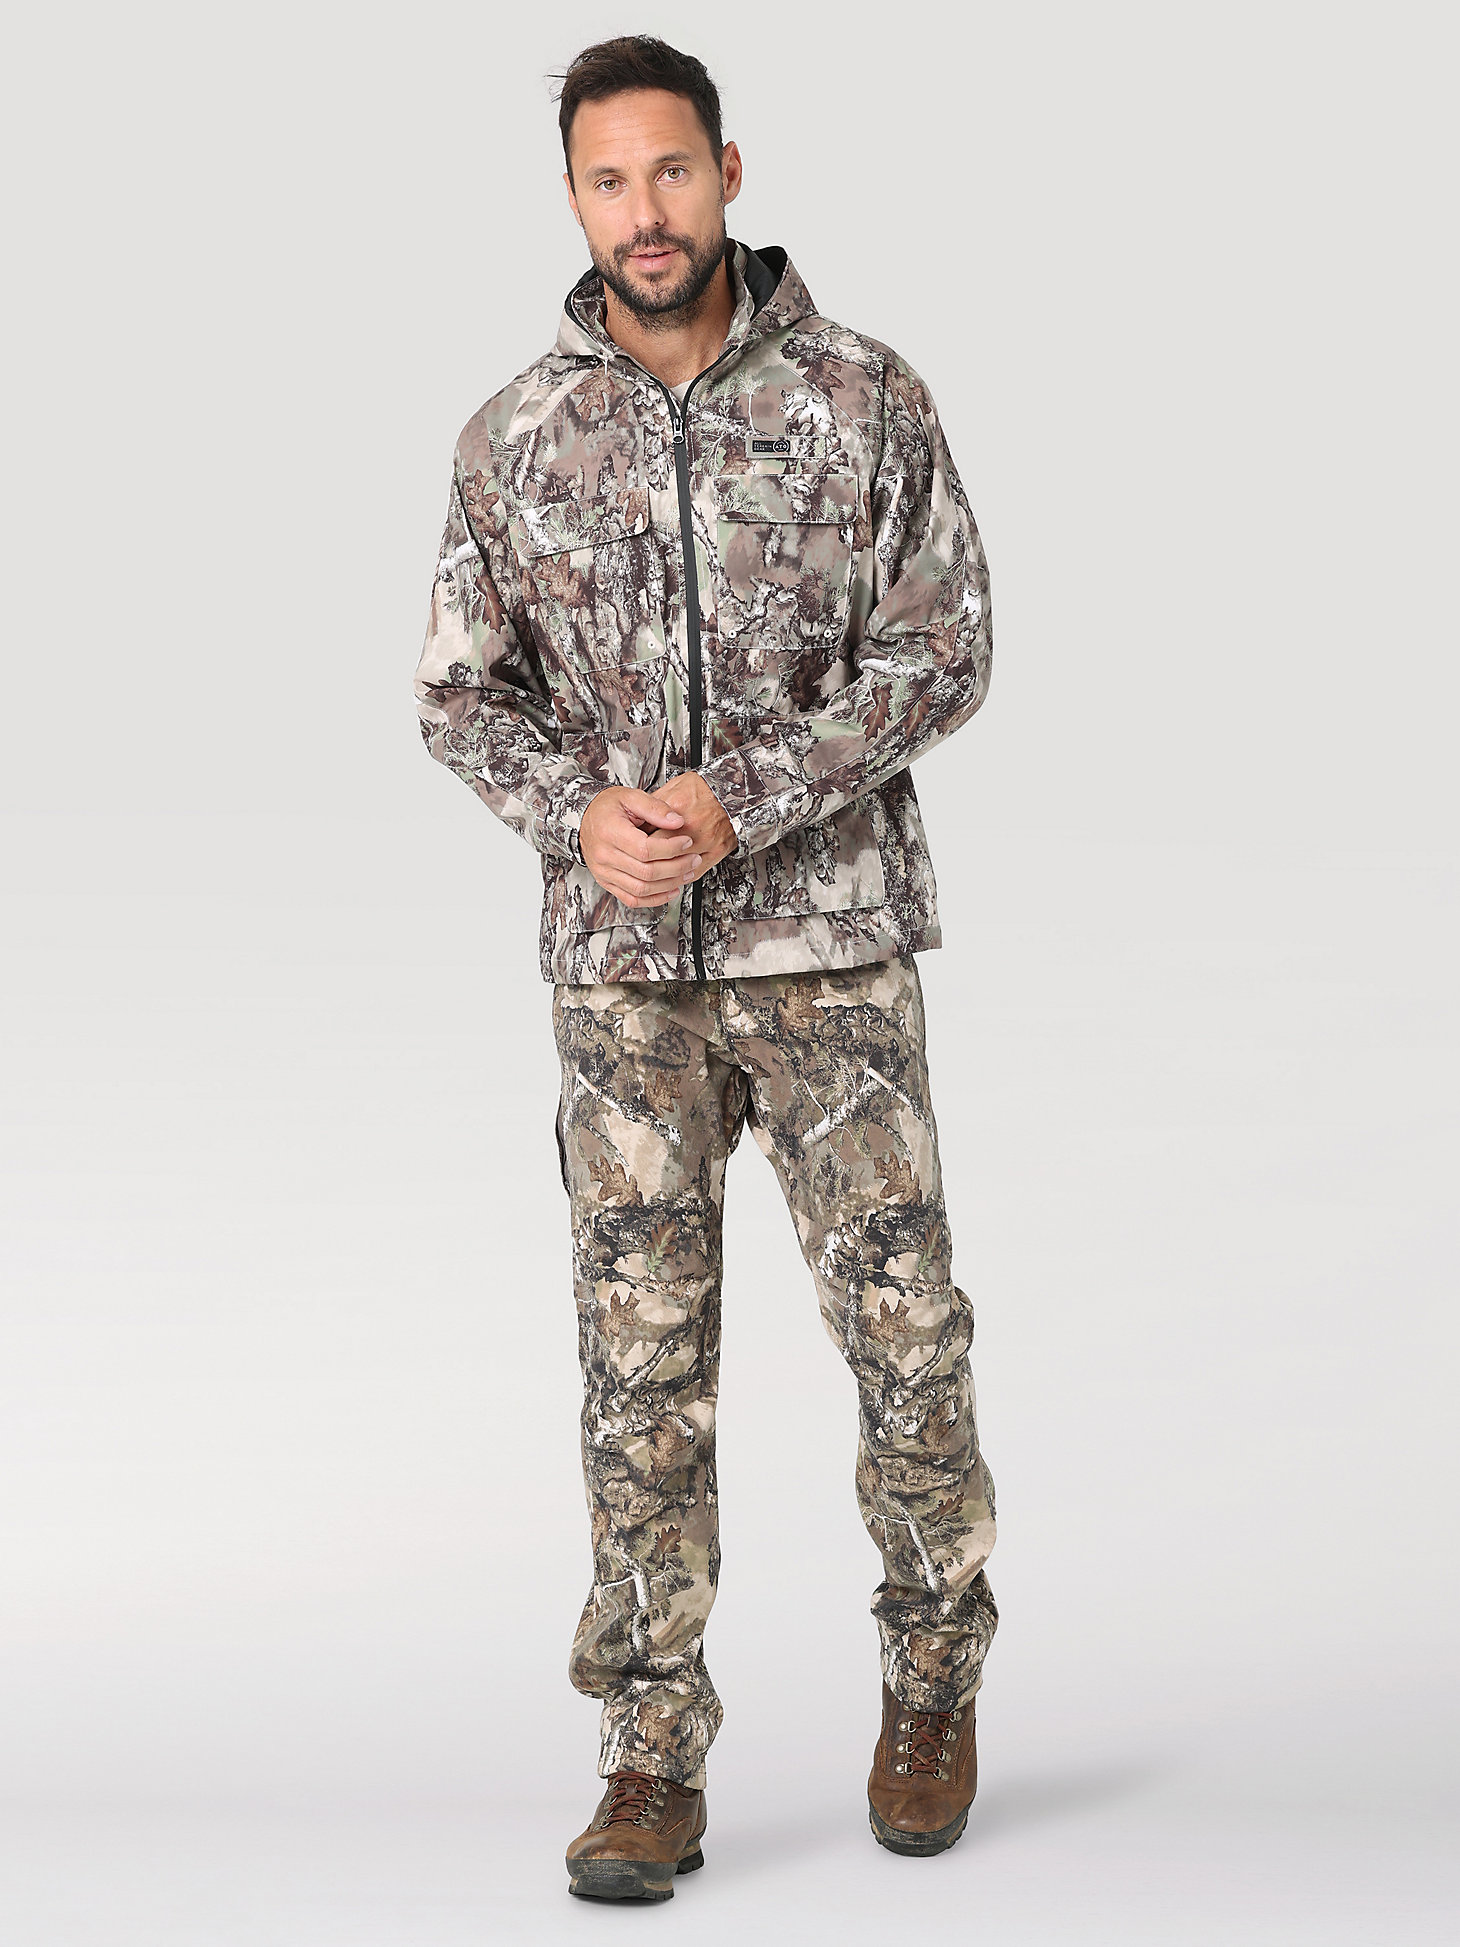 ATG Hunter™ Men's Fleece Lined Utility Pant in Warmwoods Camo main view